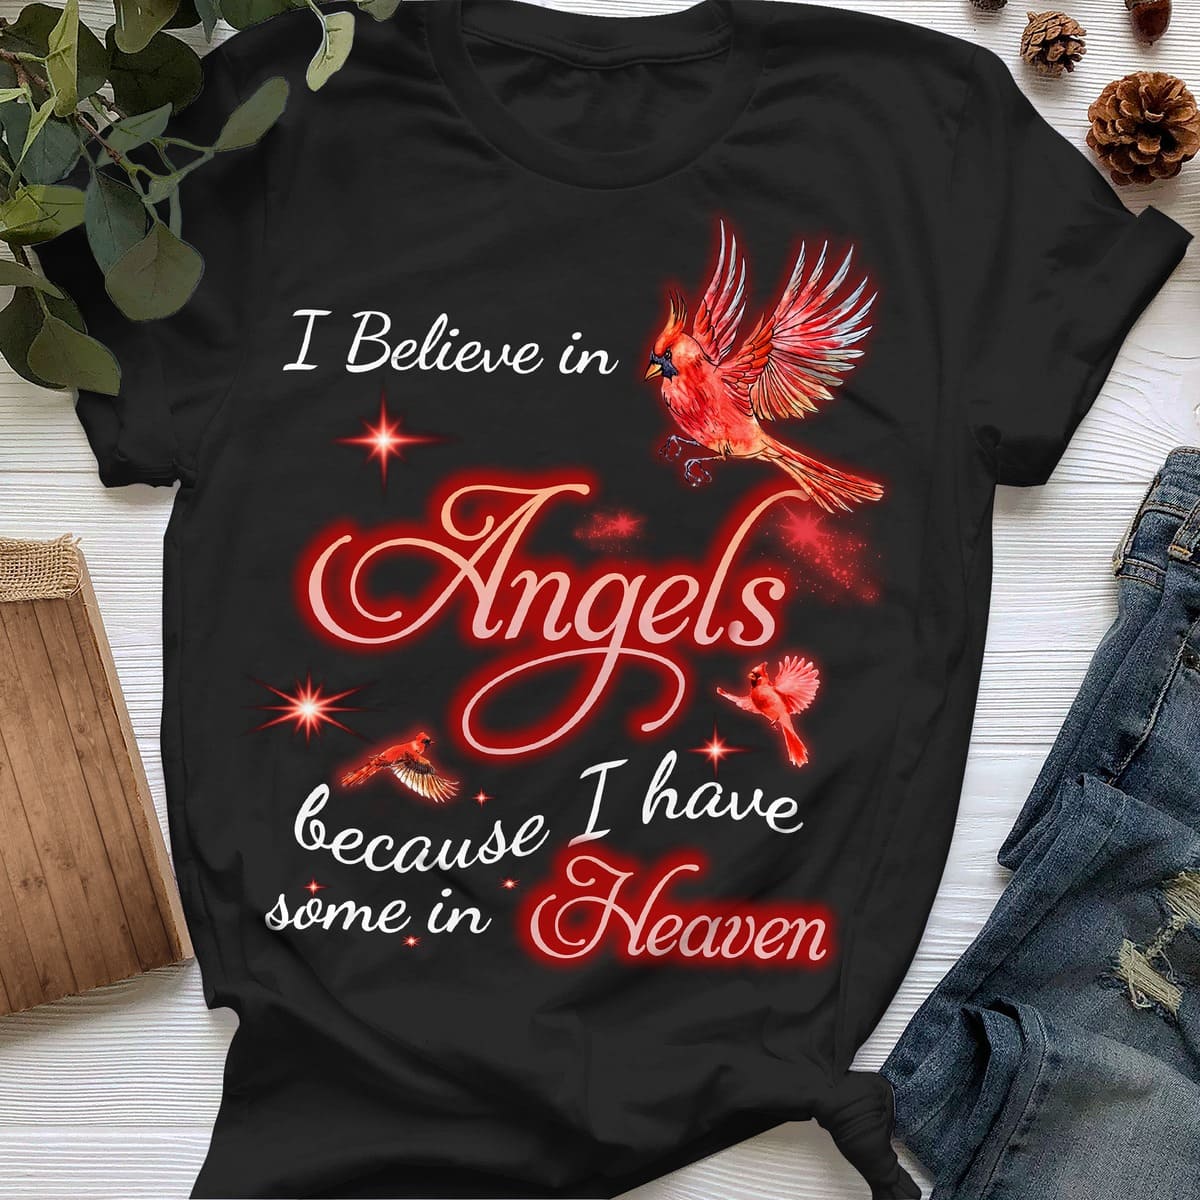 I believe in angels because I have some in heaven - Red cardinal, Angel in heaven